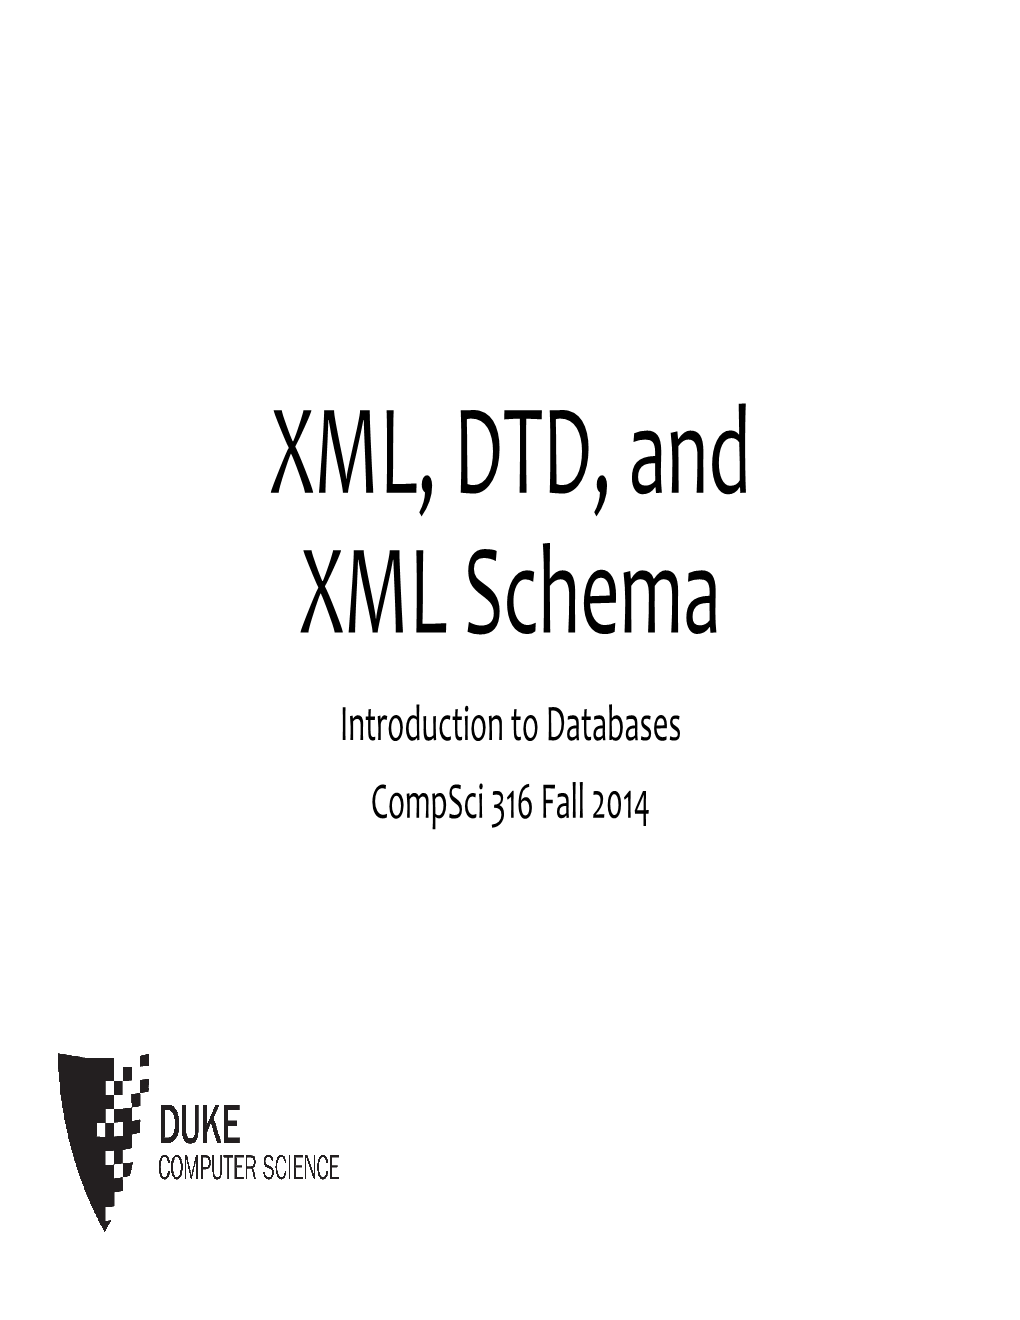 XML, DTD, and XML Schema Introduction to Databases Compsci 316 Fall 2014 2 Announcements (Tue